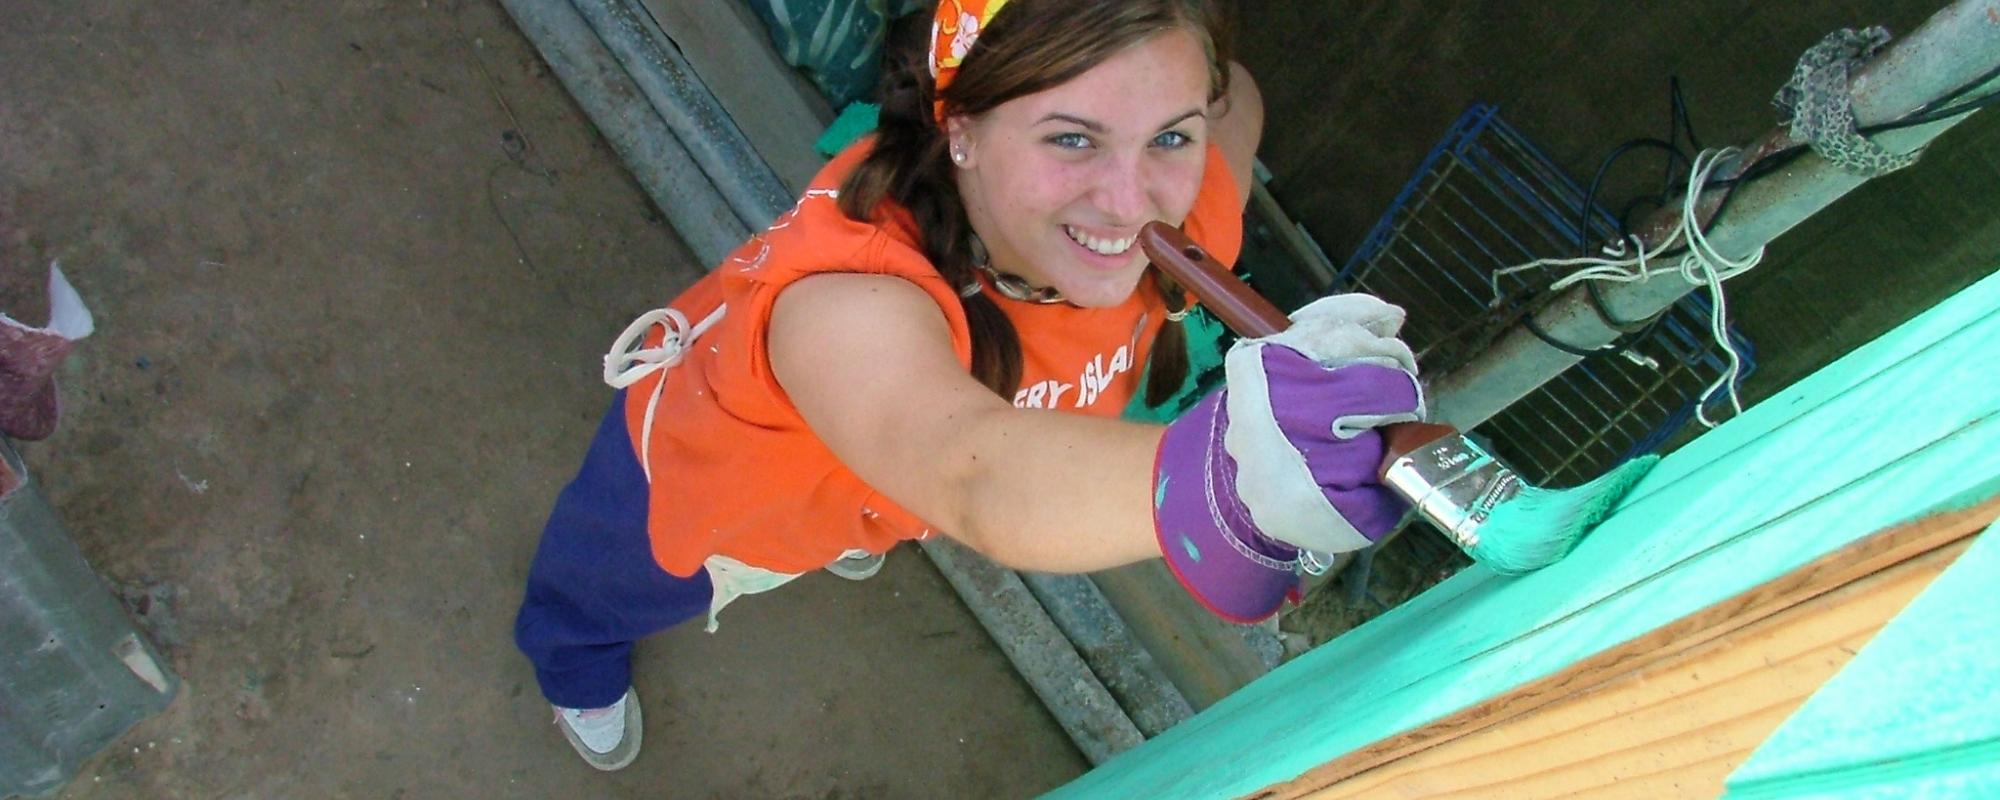 volunteer smiling and painting